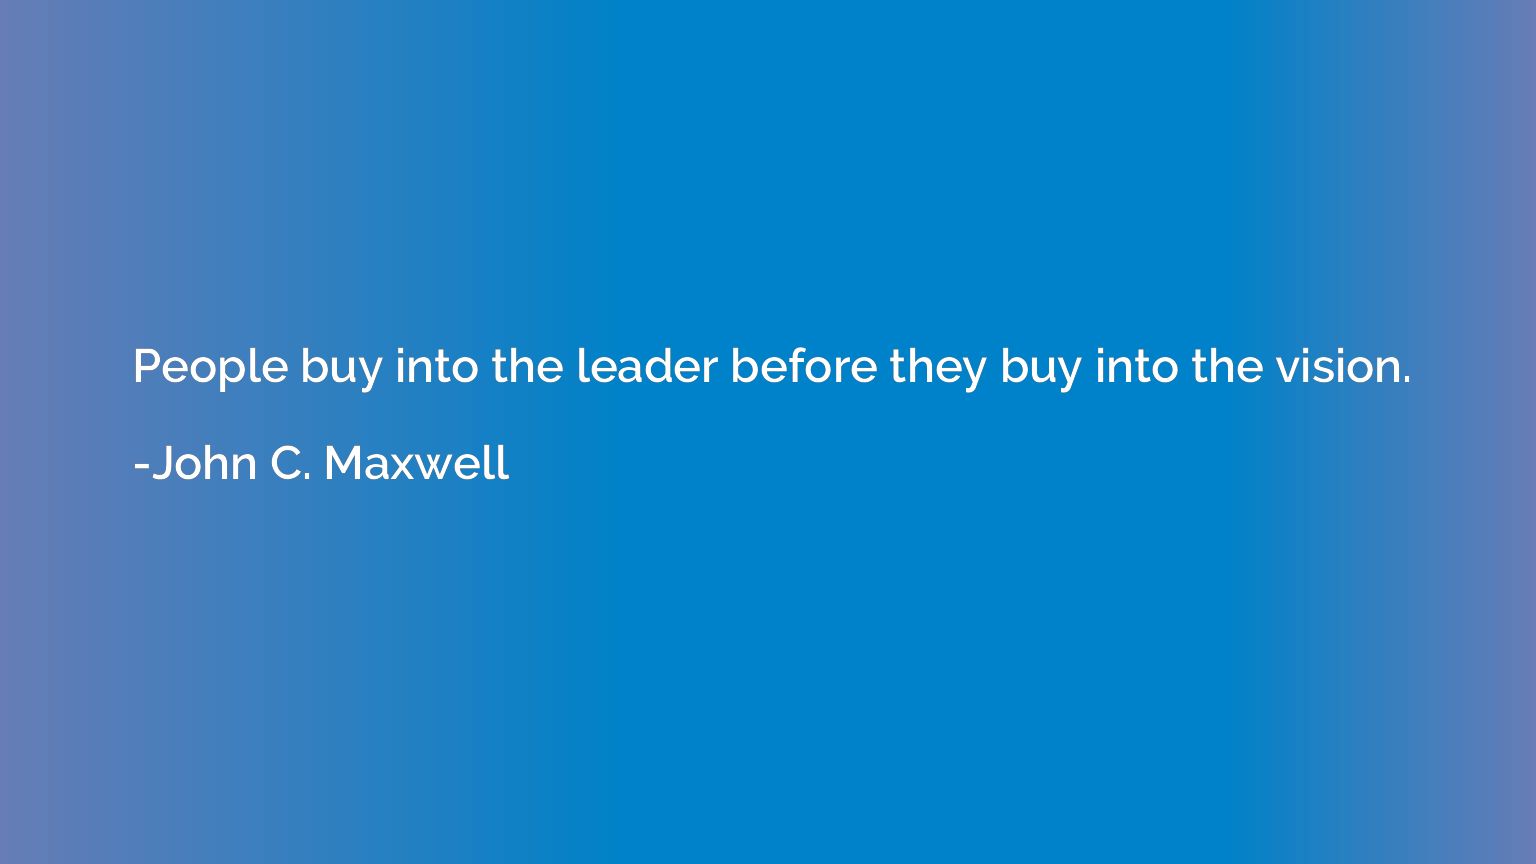 People buy into the leader before they buy into the vision.